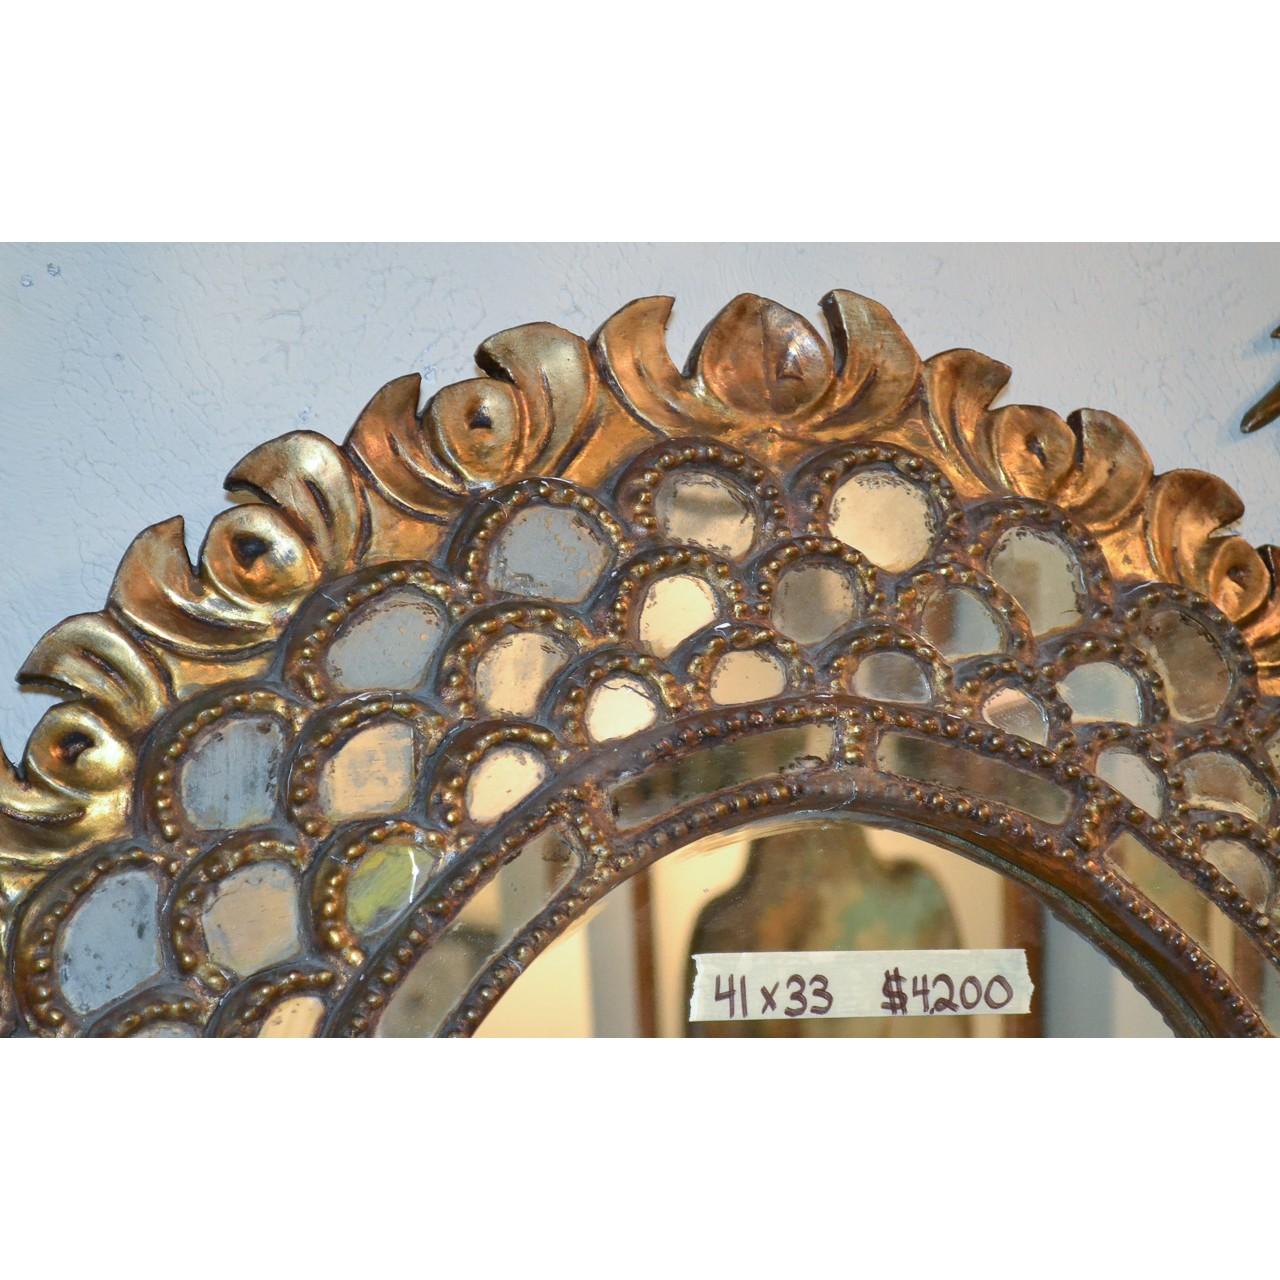 Magnificent Italian Hollywood Regency style cabochon-shaped oval mirror. The ornate giltwood frame with a finely carved foliate border, the central mirror surrounded by tiers of small inlaid glass and mirror accents,

circa 1940.